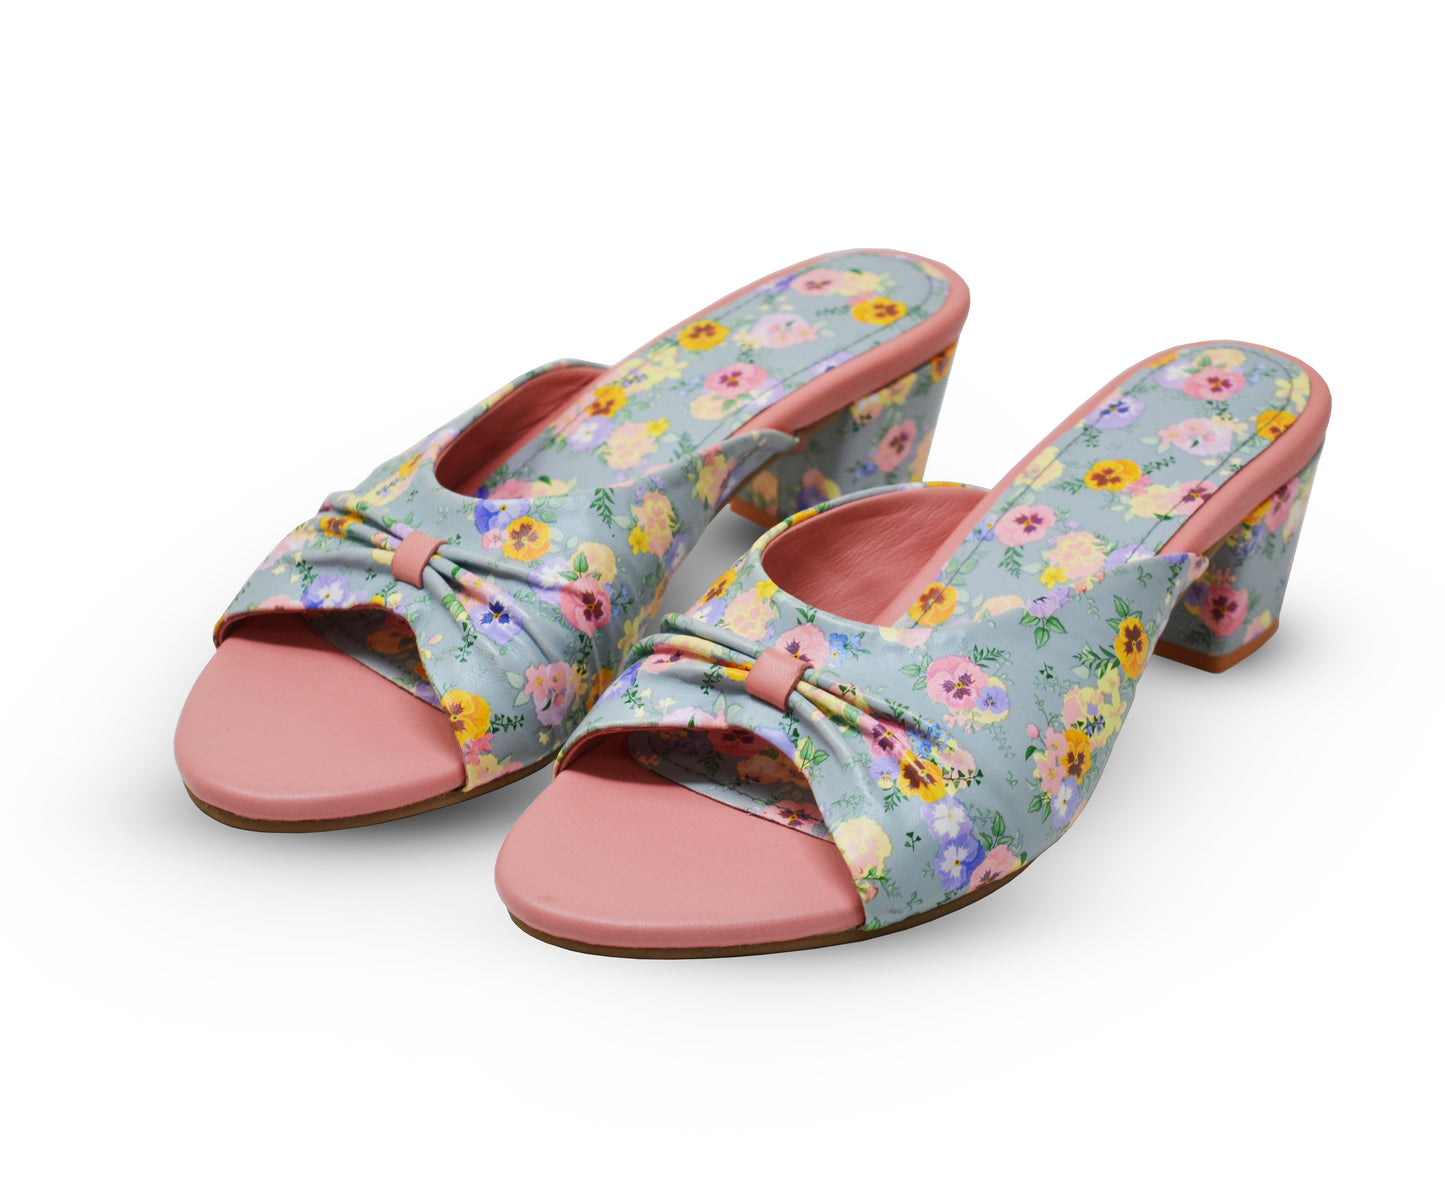 The Pink Potter Women's Sandals